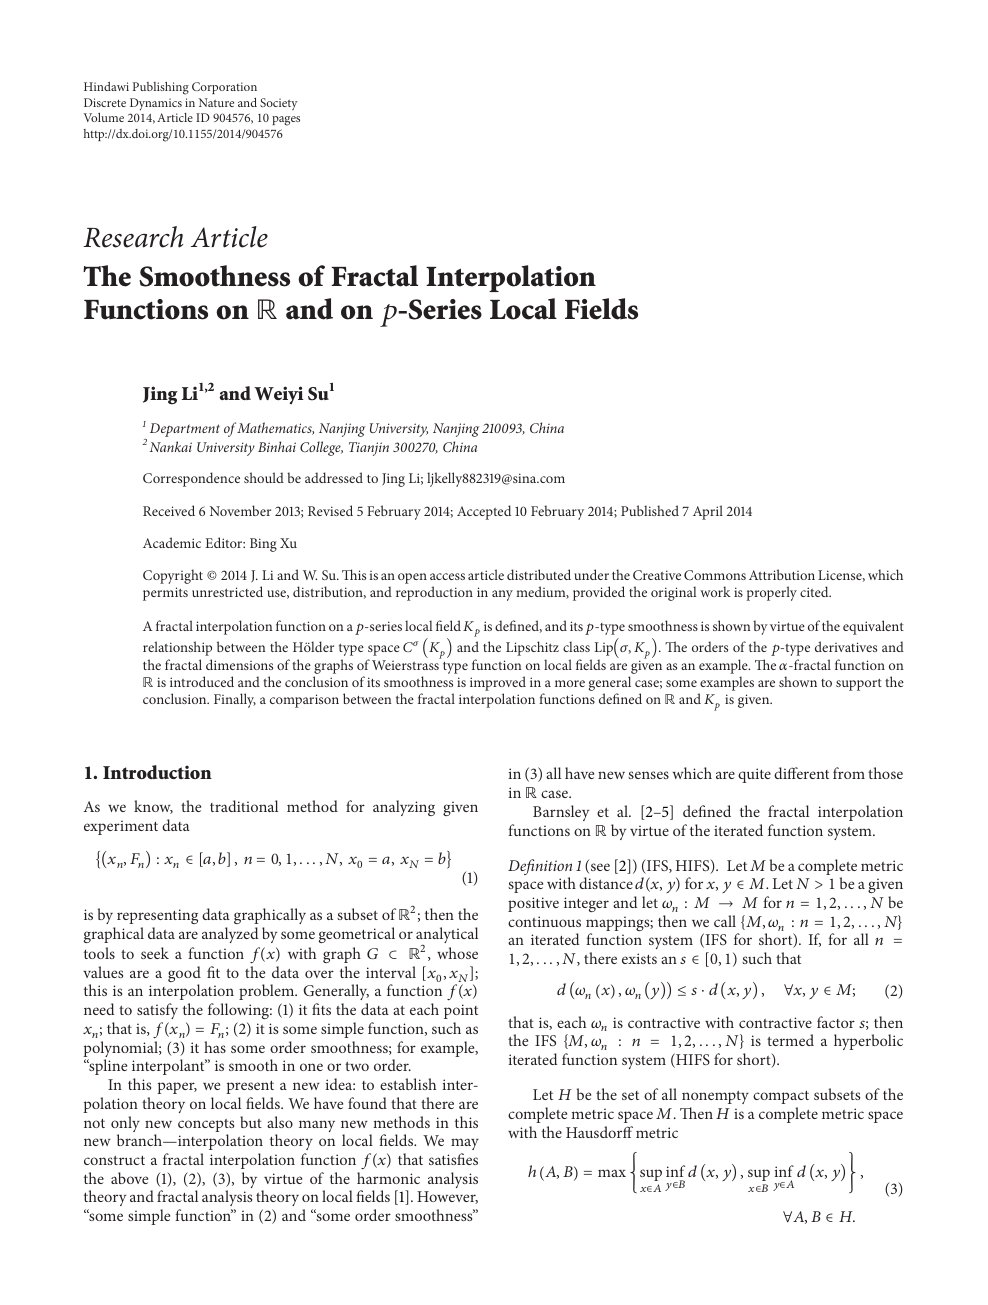 The Smoothness Of Fractal Interpolation Functions On And On Series Local Fields Topic Of Research Paper In Mathematics Download Scholarly Article Pdf And Read For Free On Cyberleninka Open Science Hub